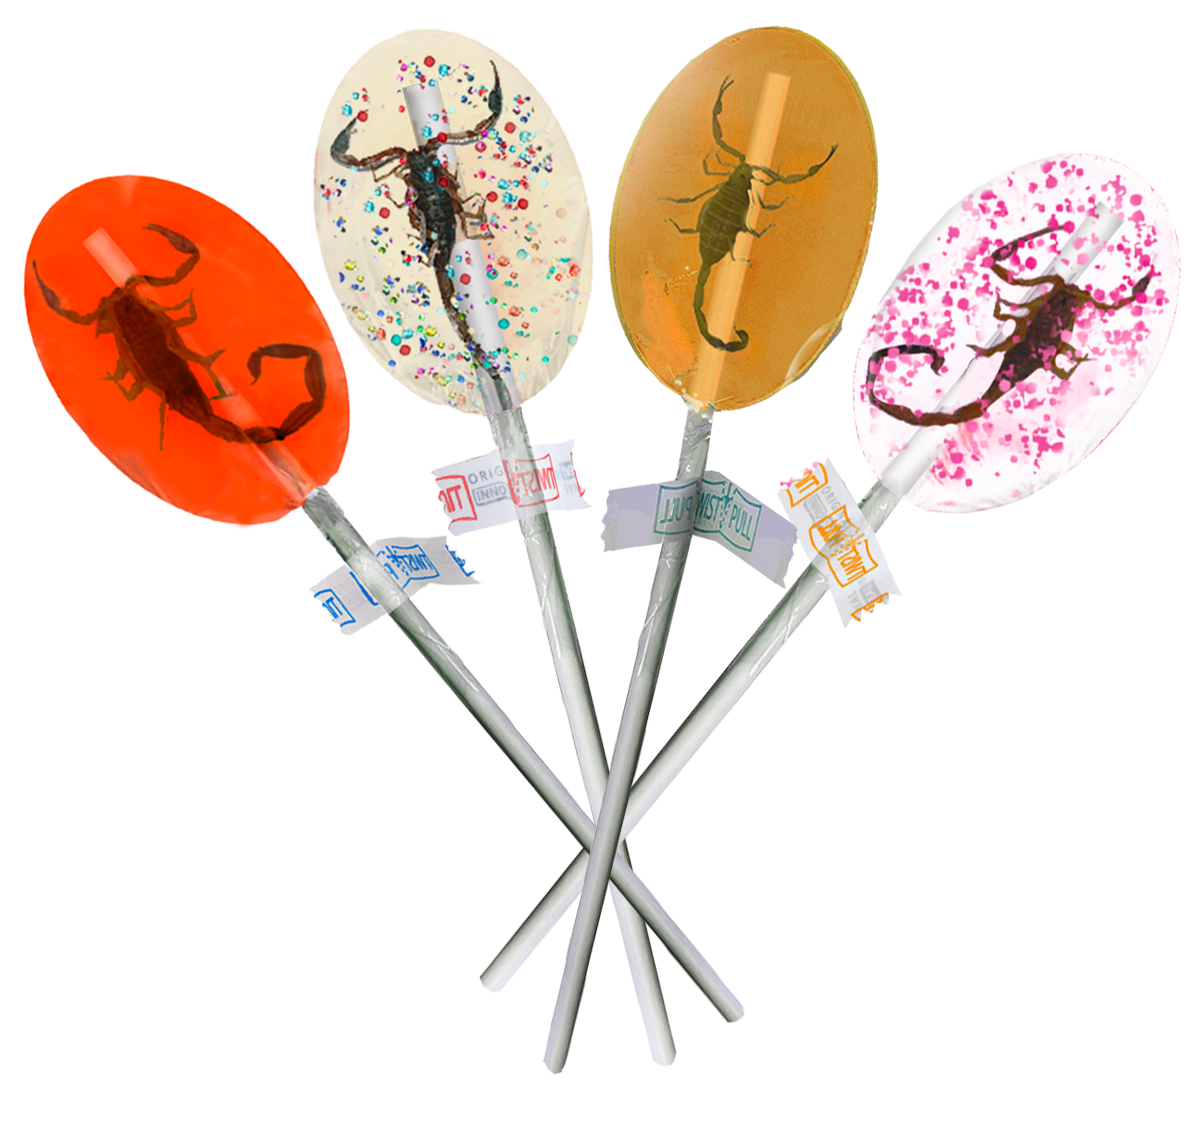 Scorpion Pops - Real Scorpions You Can Eat